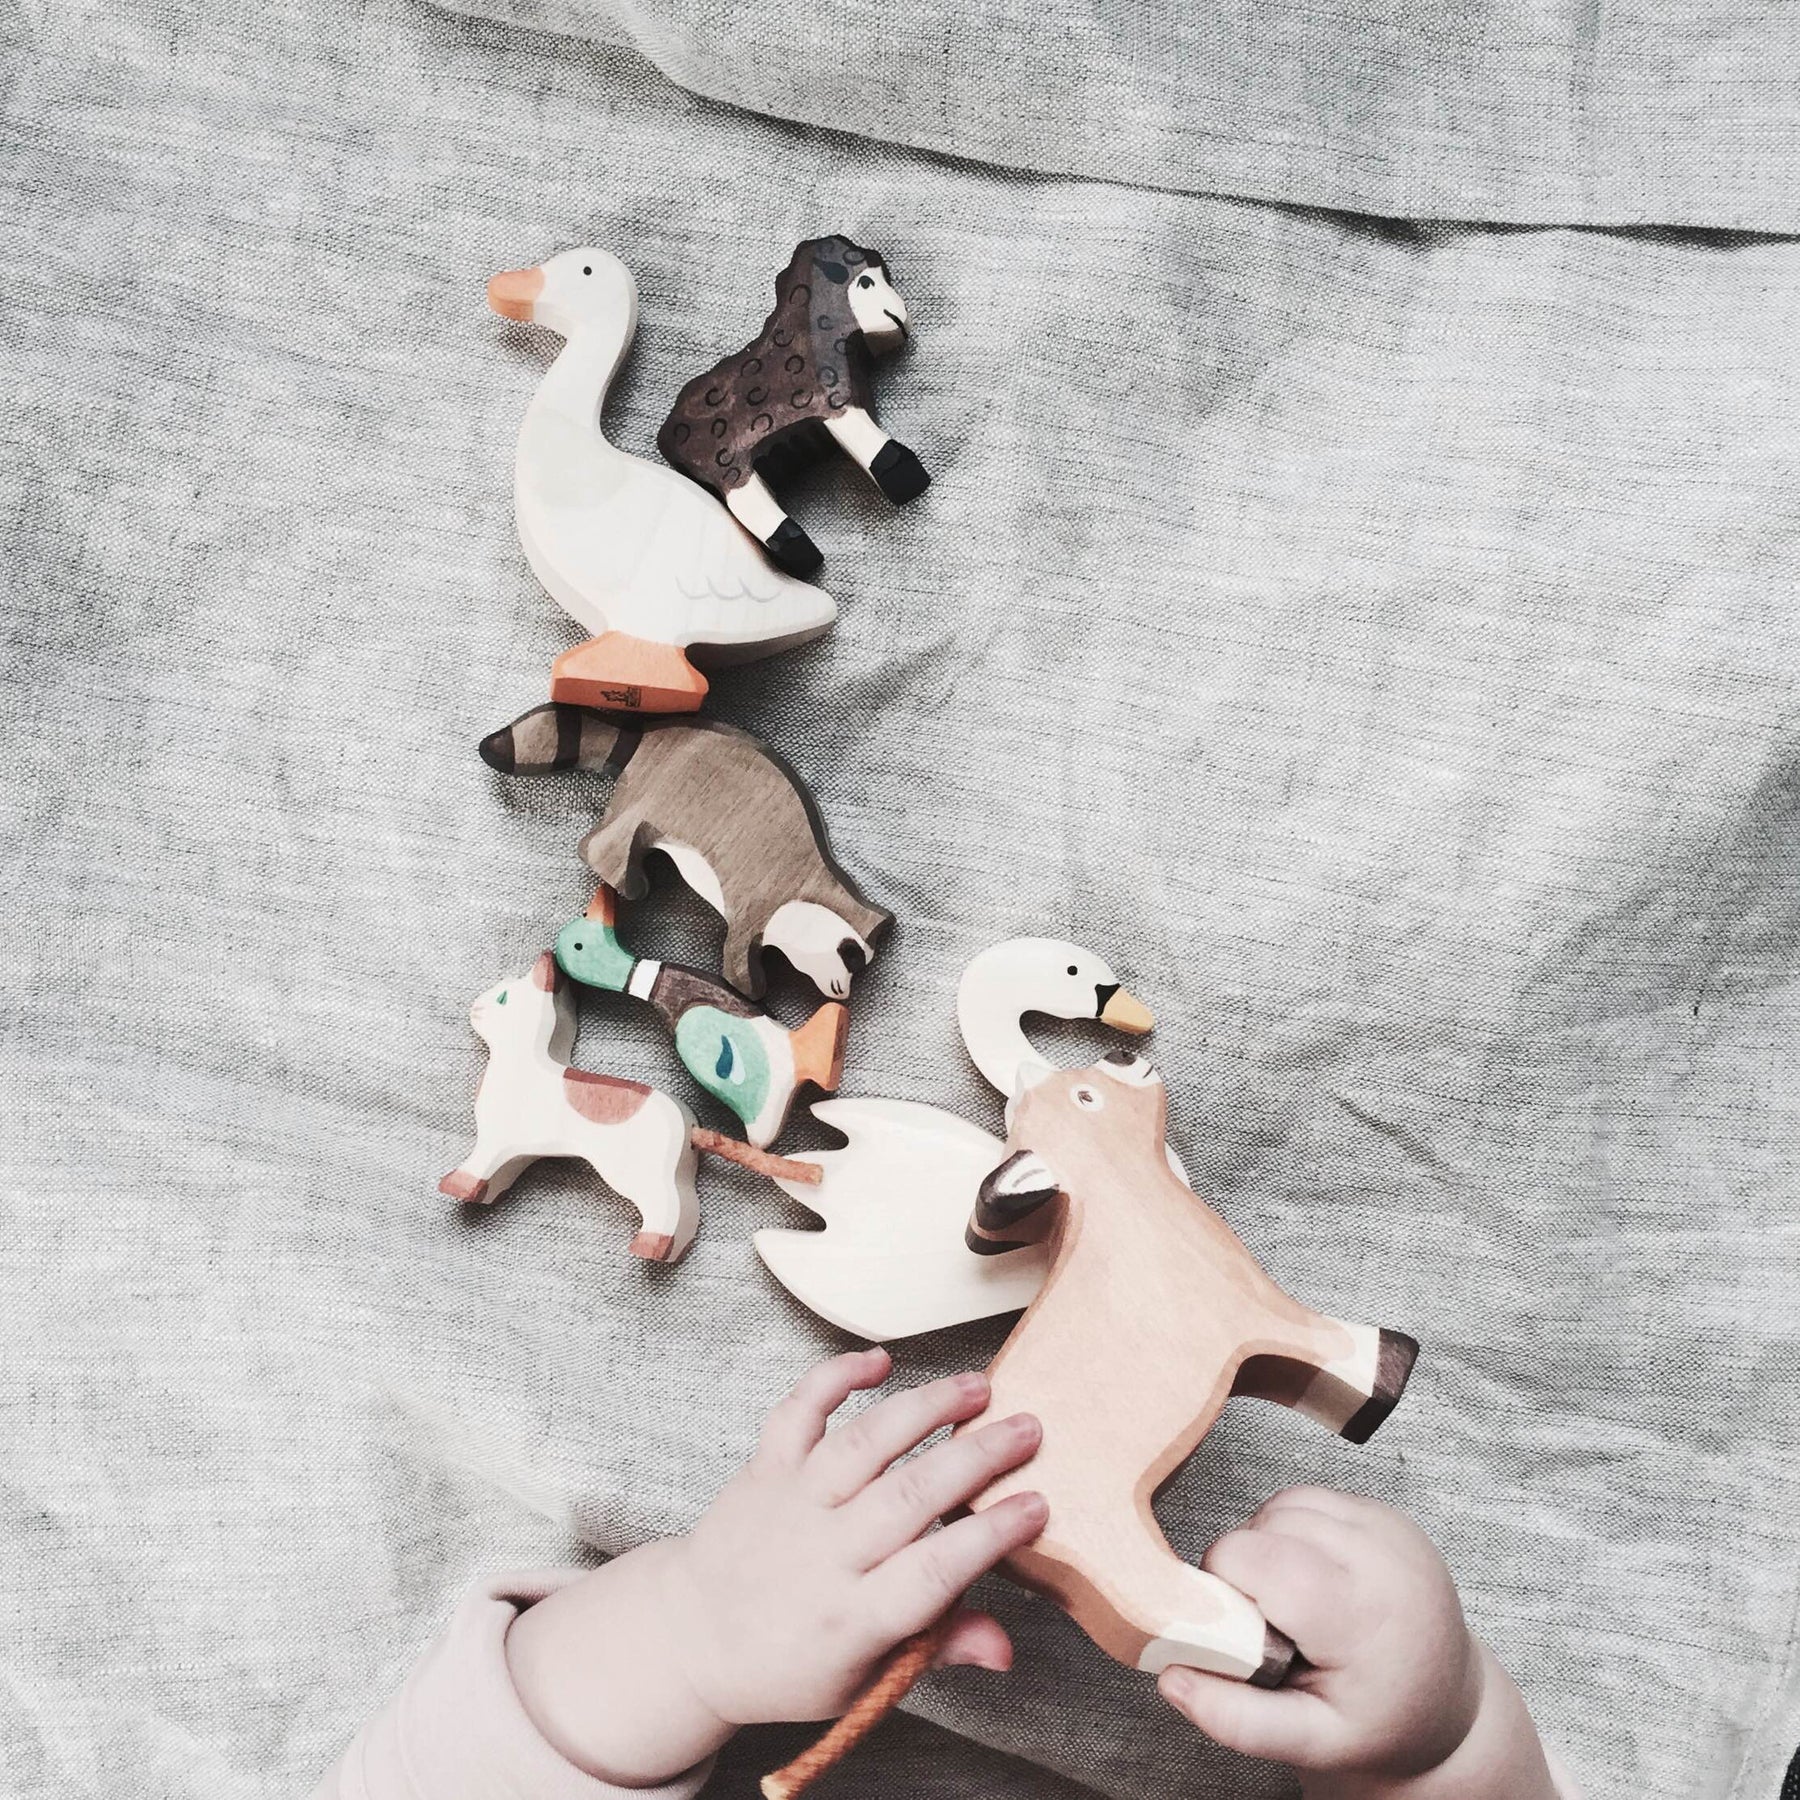 Nothing quite beats wooden animals that don't make a peep other than out of your child's imagination!